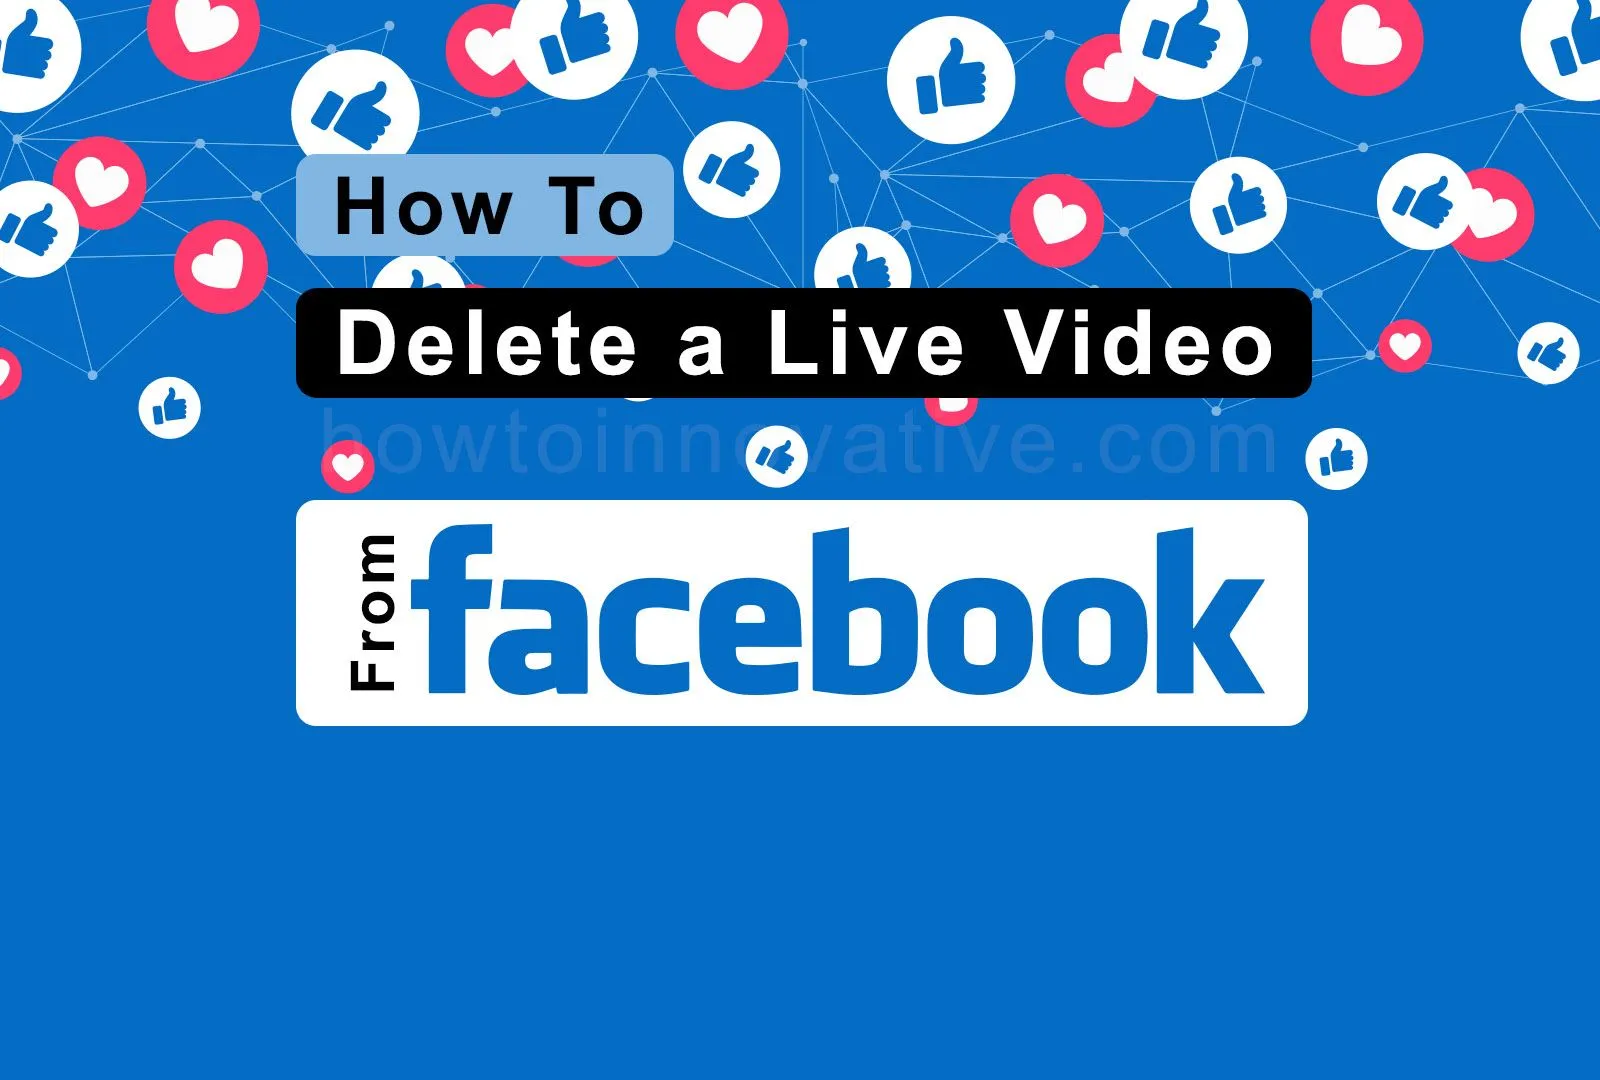 How To Delete a Live Video From Facebook